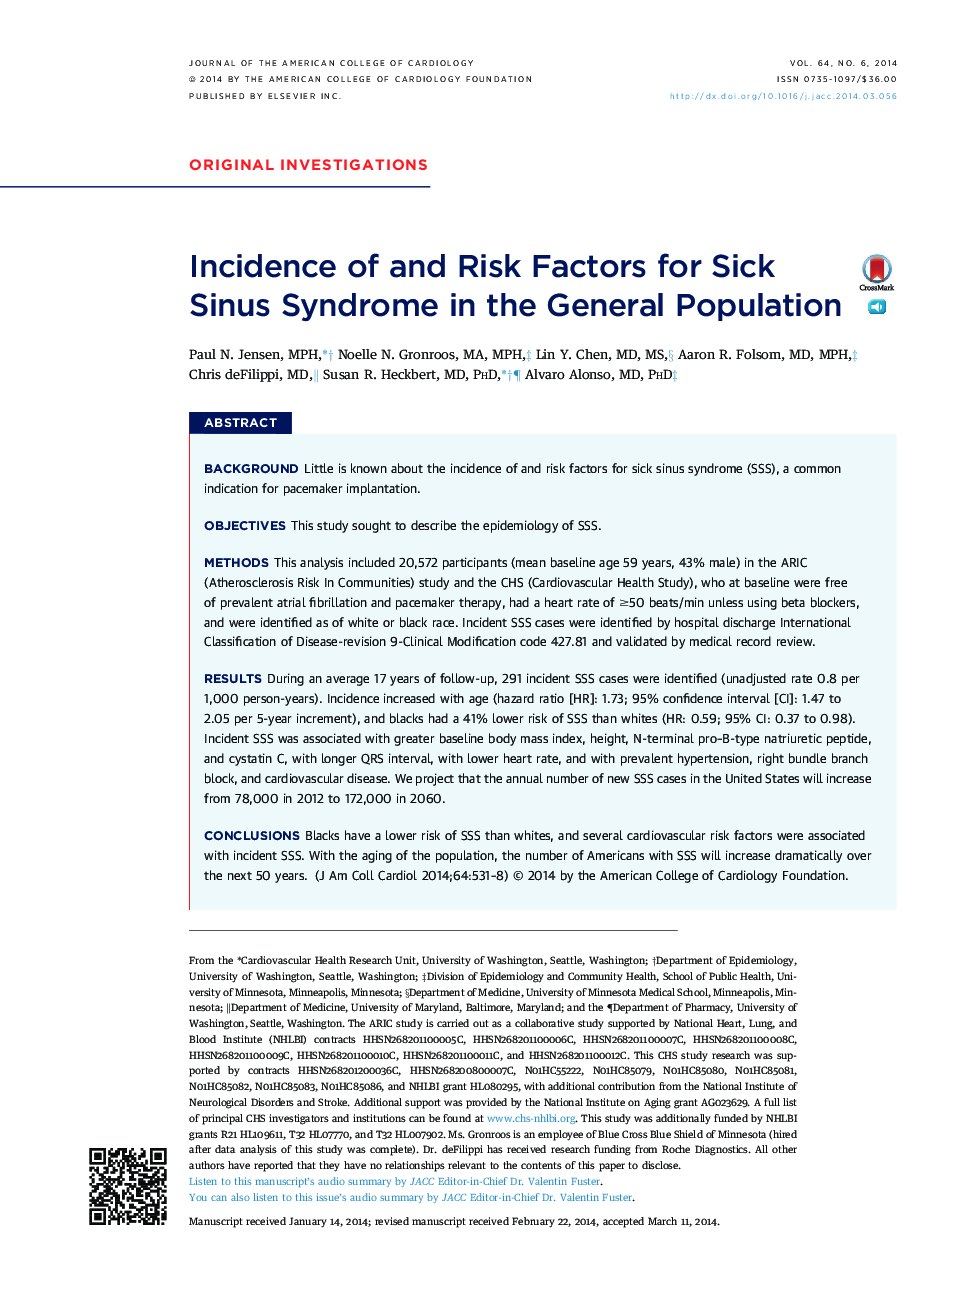 Incidence of and Risk Factors for Sick Sinus Syndrome in the General Population 